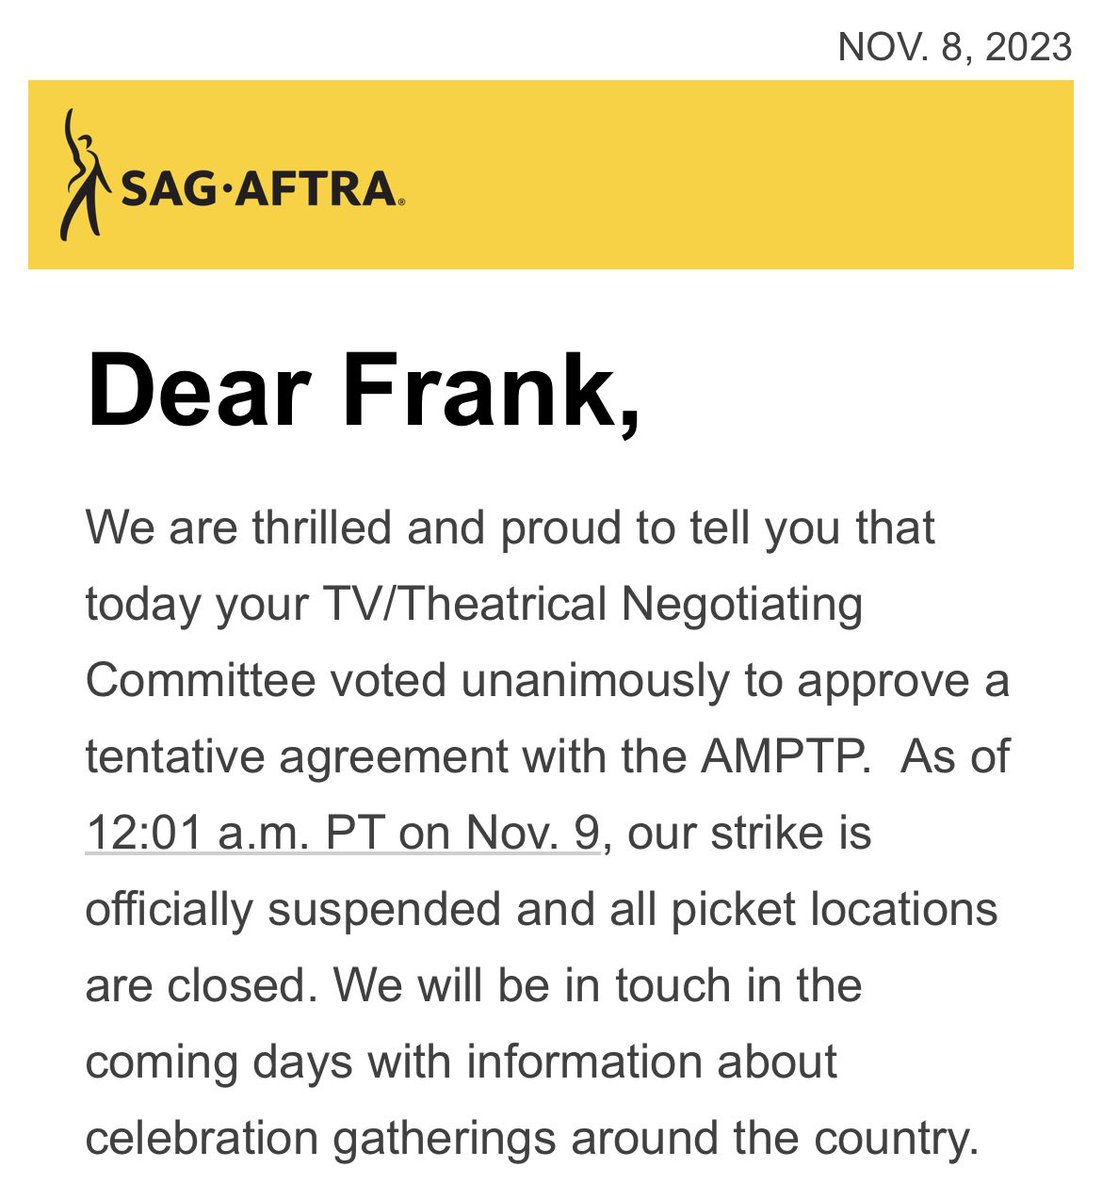 THANK YOU so much to our negotiating team and to everyone involved at every level!! To the future, folks! Cheers🥃 @sagaftra #sagaftra #sagaftrastrong